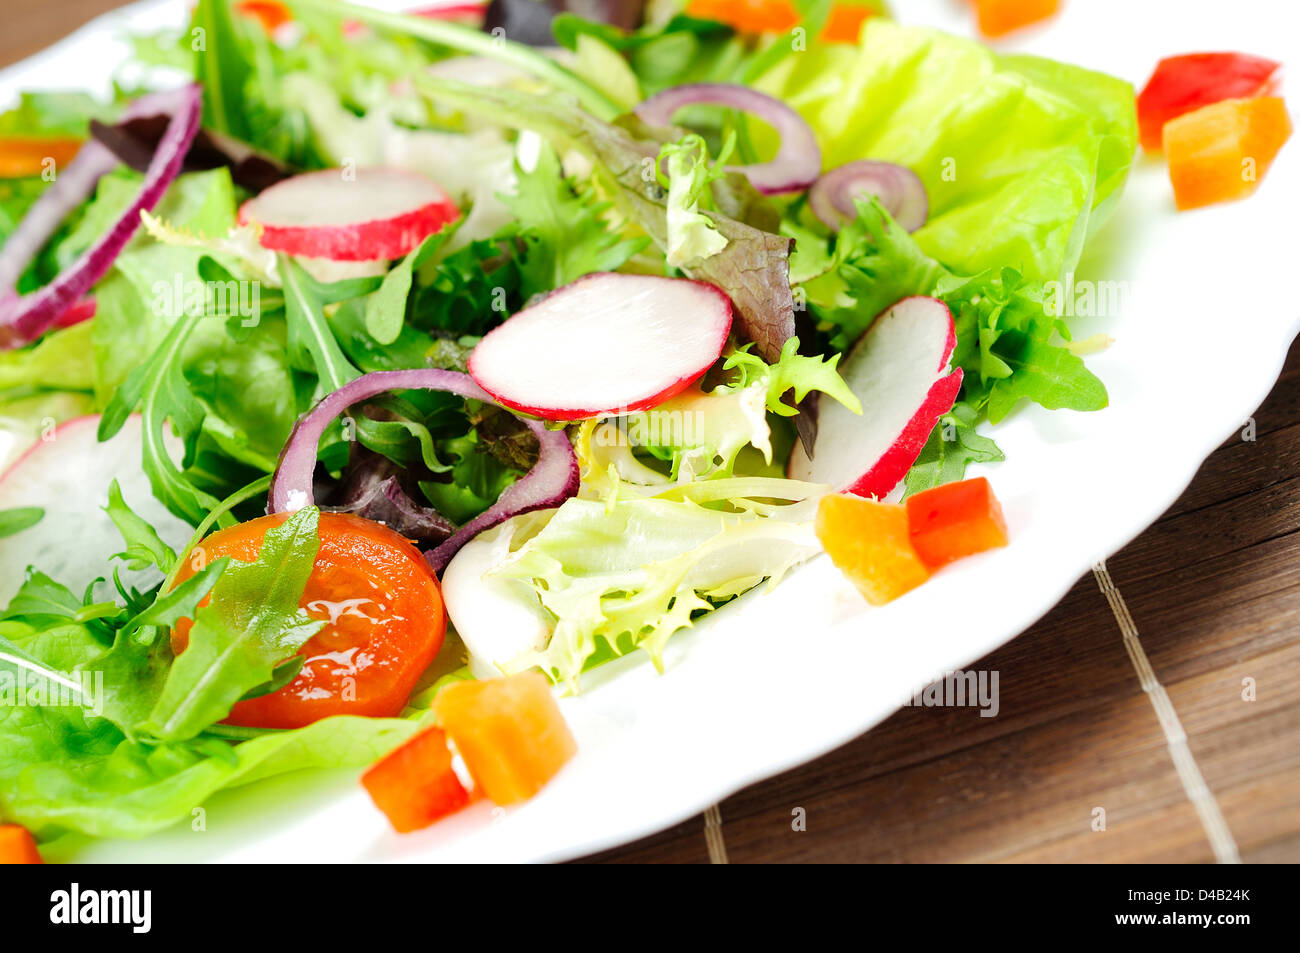 Plate with salad on brown table Stock Photo